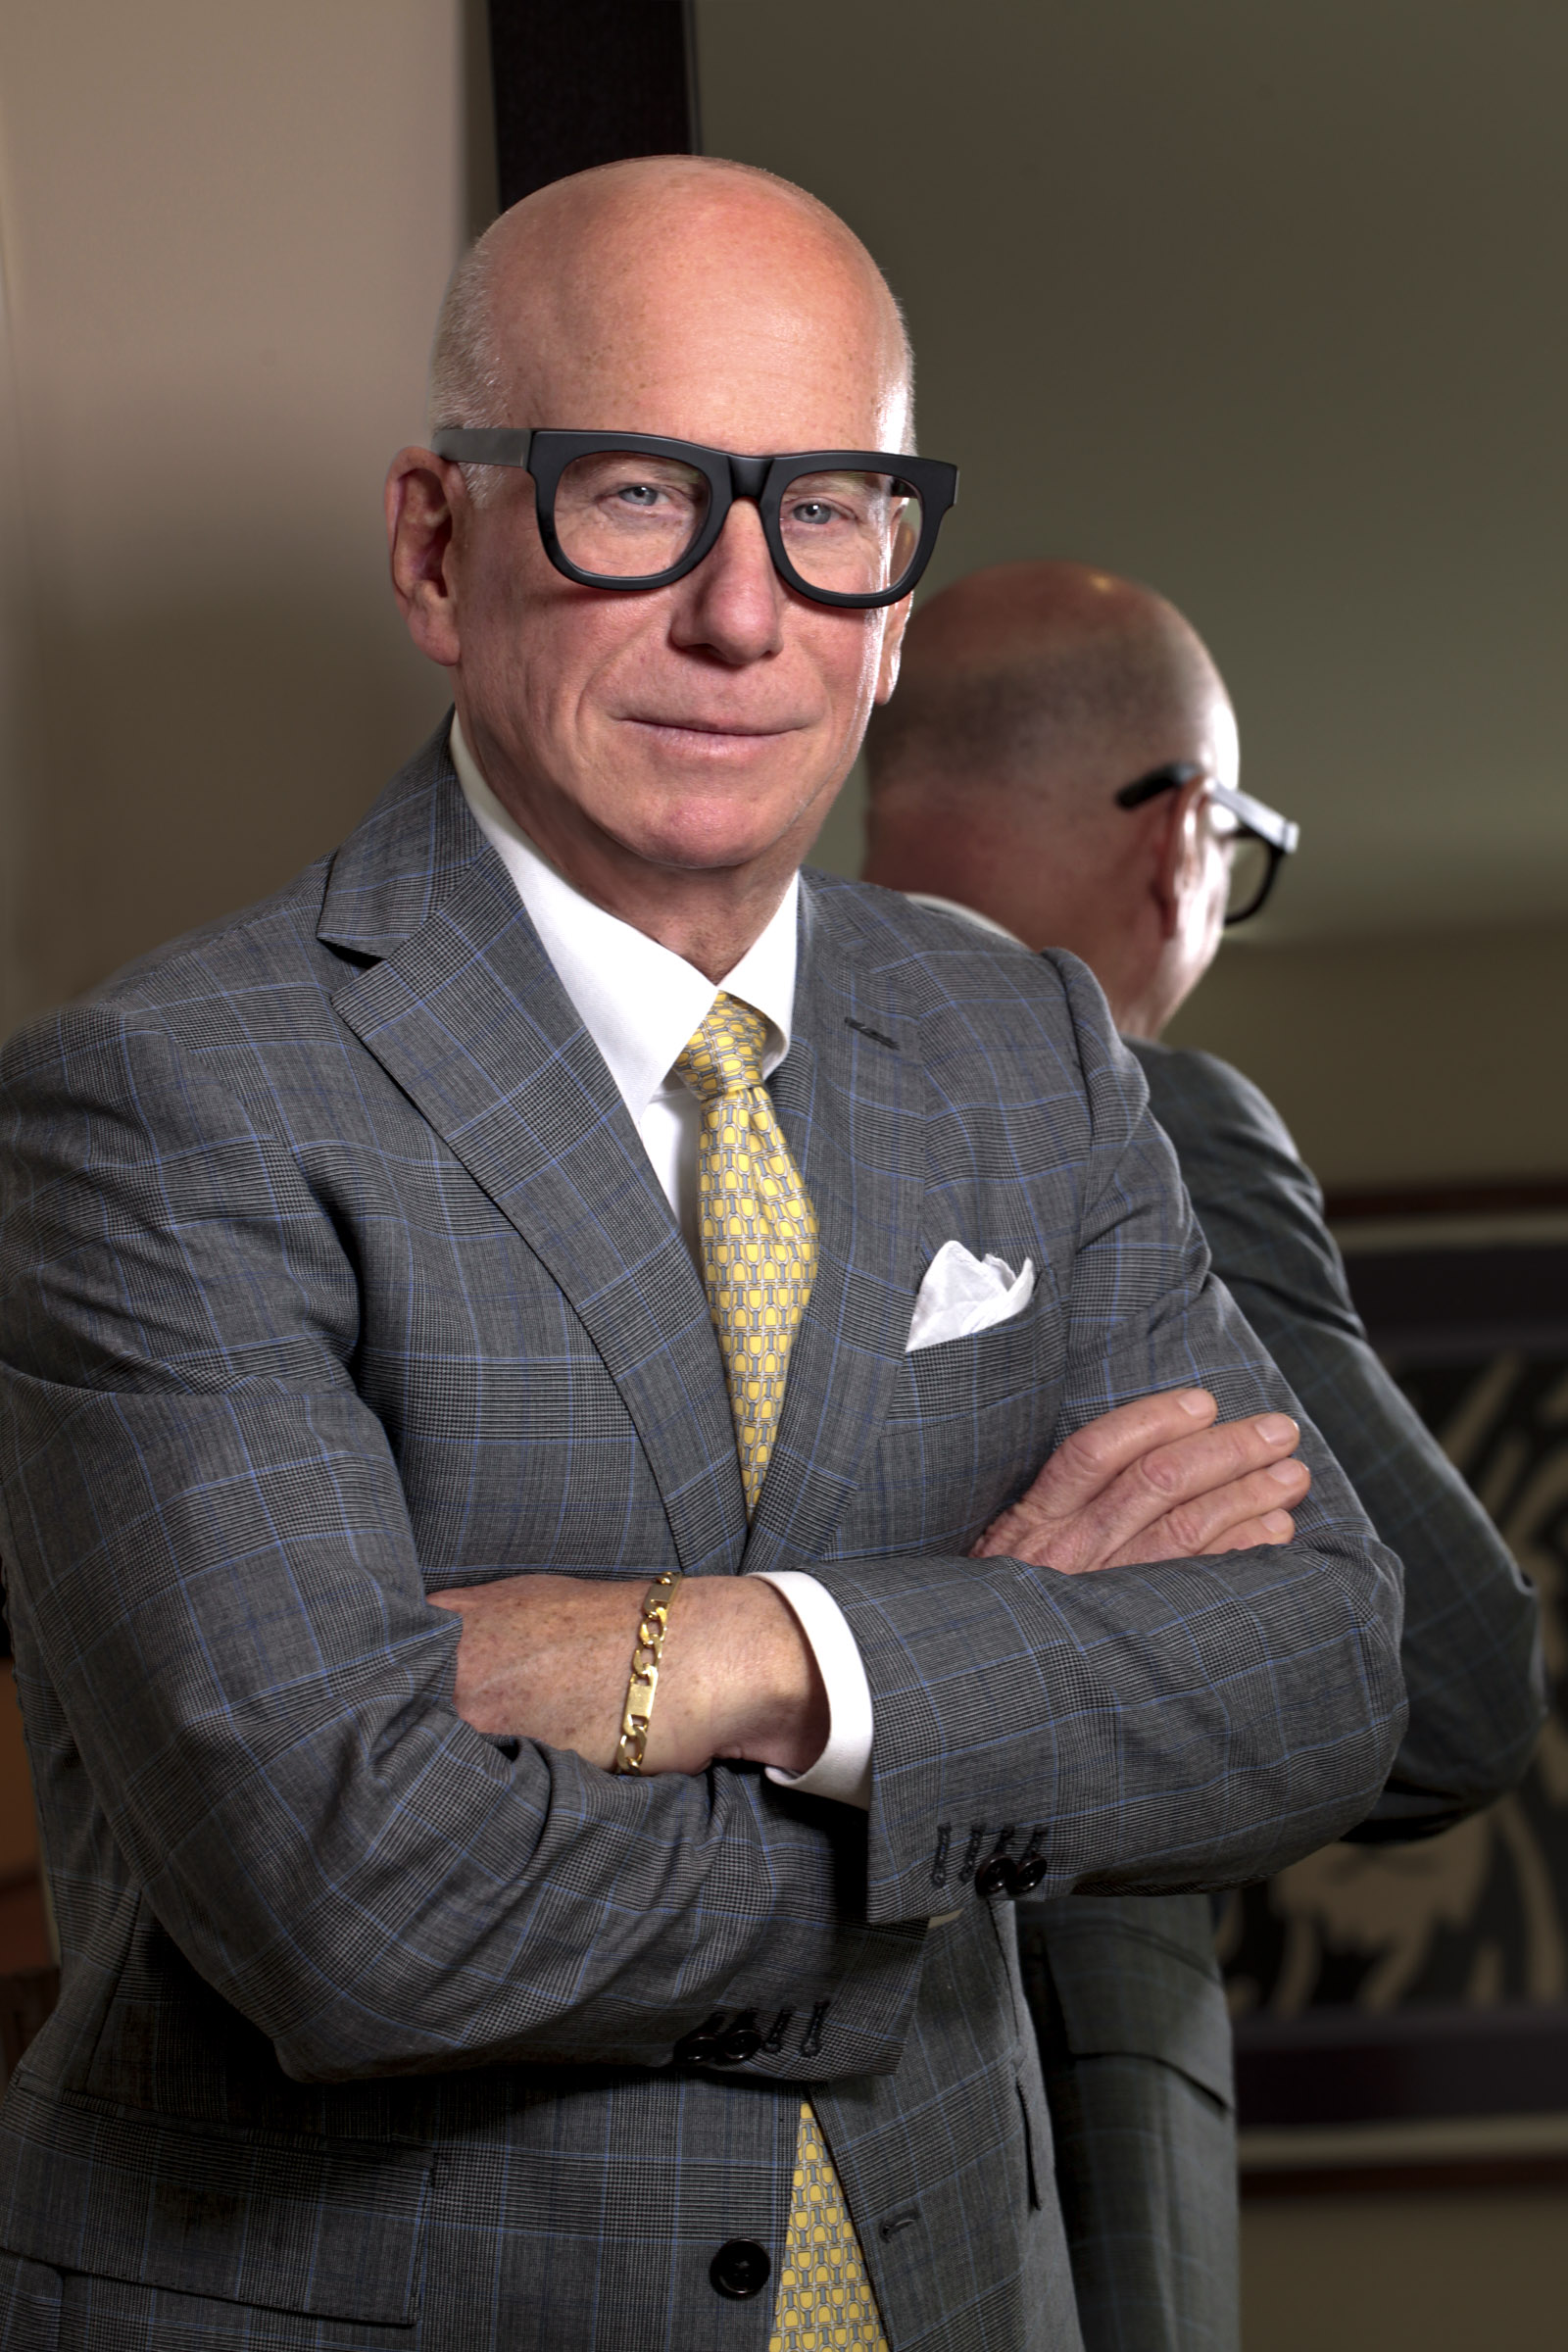 Mr. Marks, CEO, Business Corporate Portraits and Headshots by NYC Photographer Tess Steinkolk